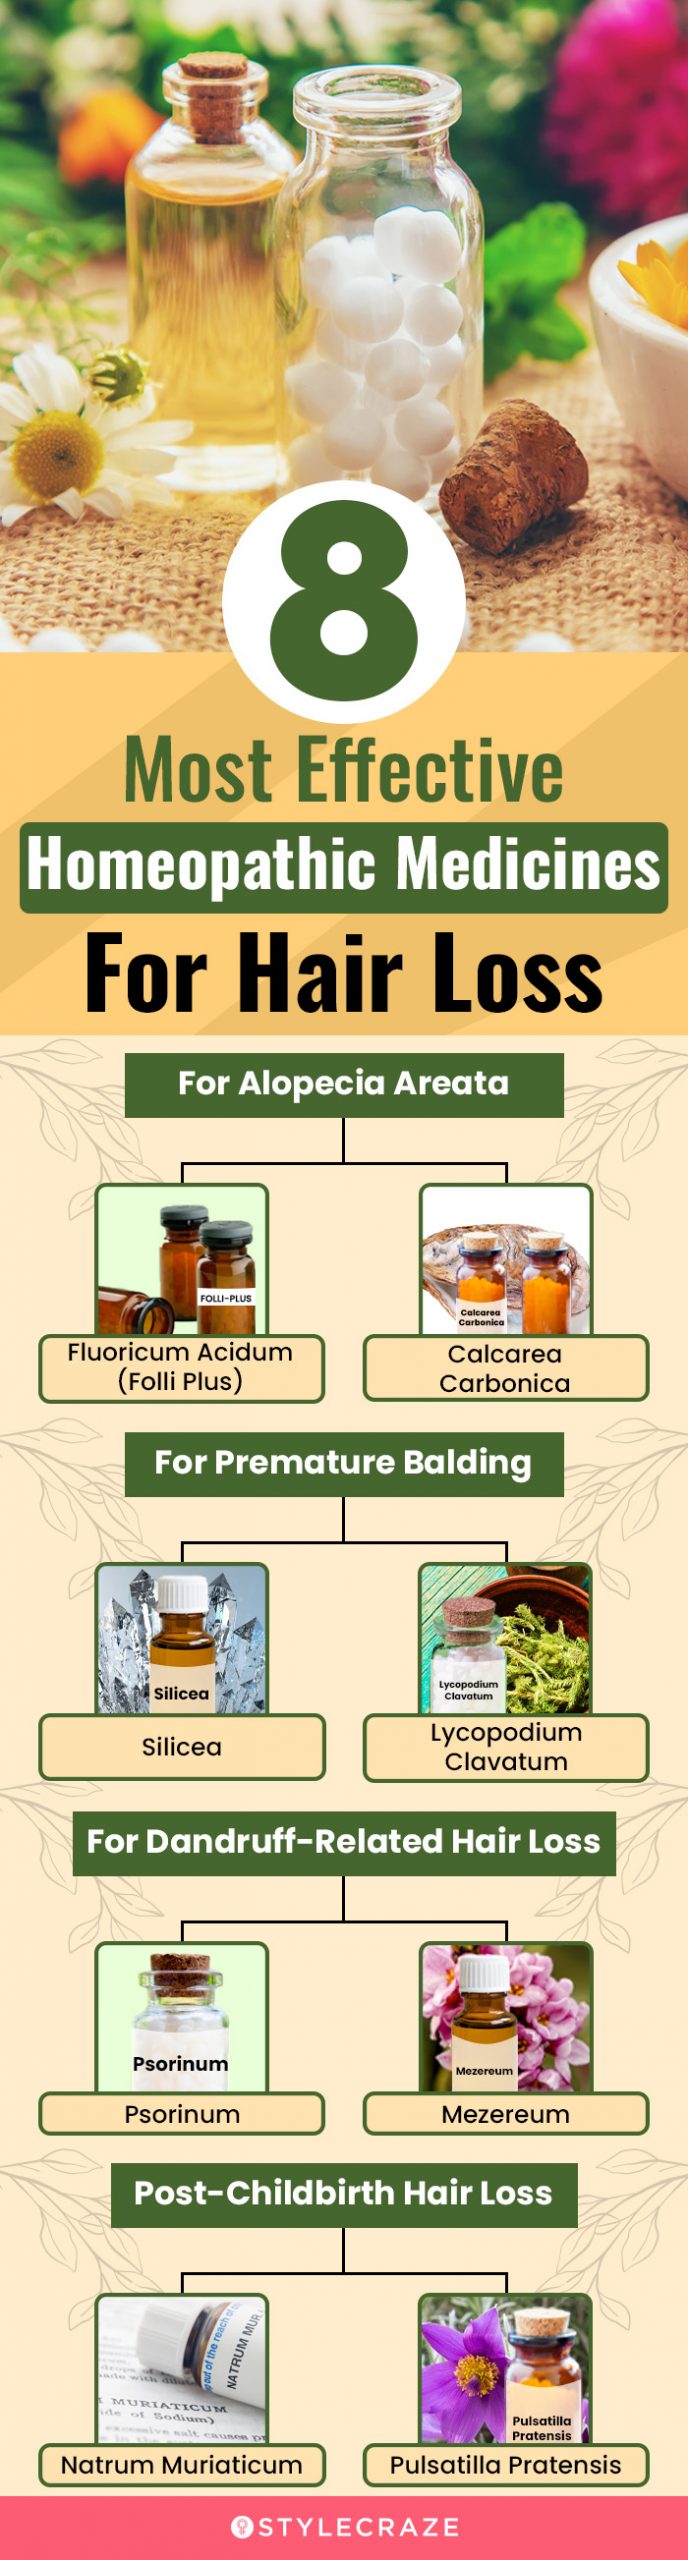 Is Hair Regrowth Possible With Homeopathy Medicines